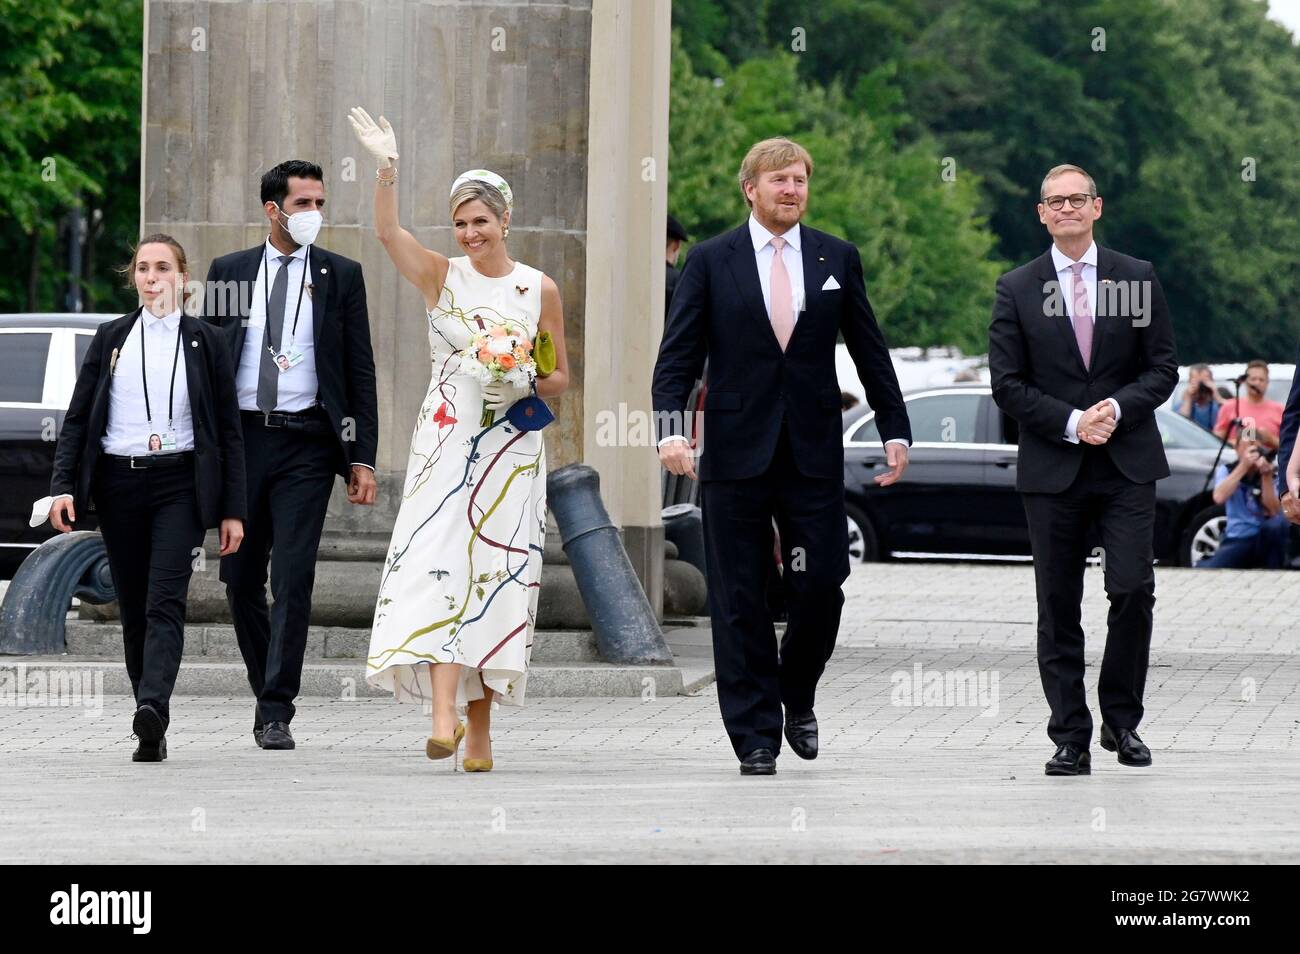 Queen Maxima, King Willem-Alexander of The Netherlands and Michael Mueller visit the Brandenburger Tor on July 5, 2021 in Berlin, Germany. Stock Photo